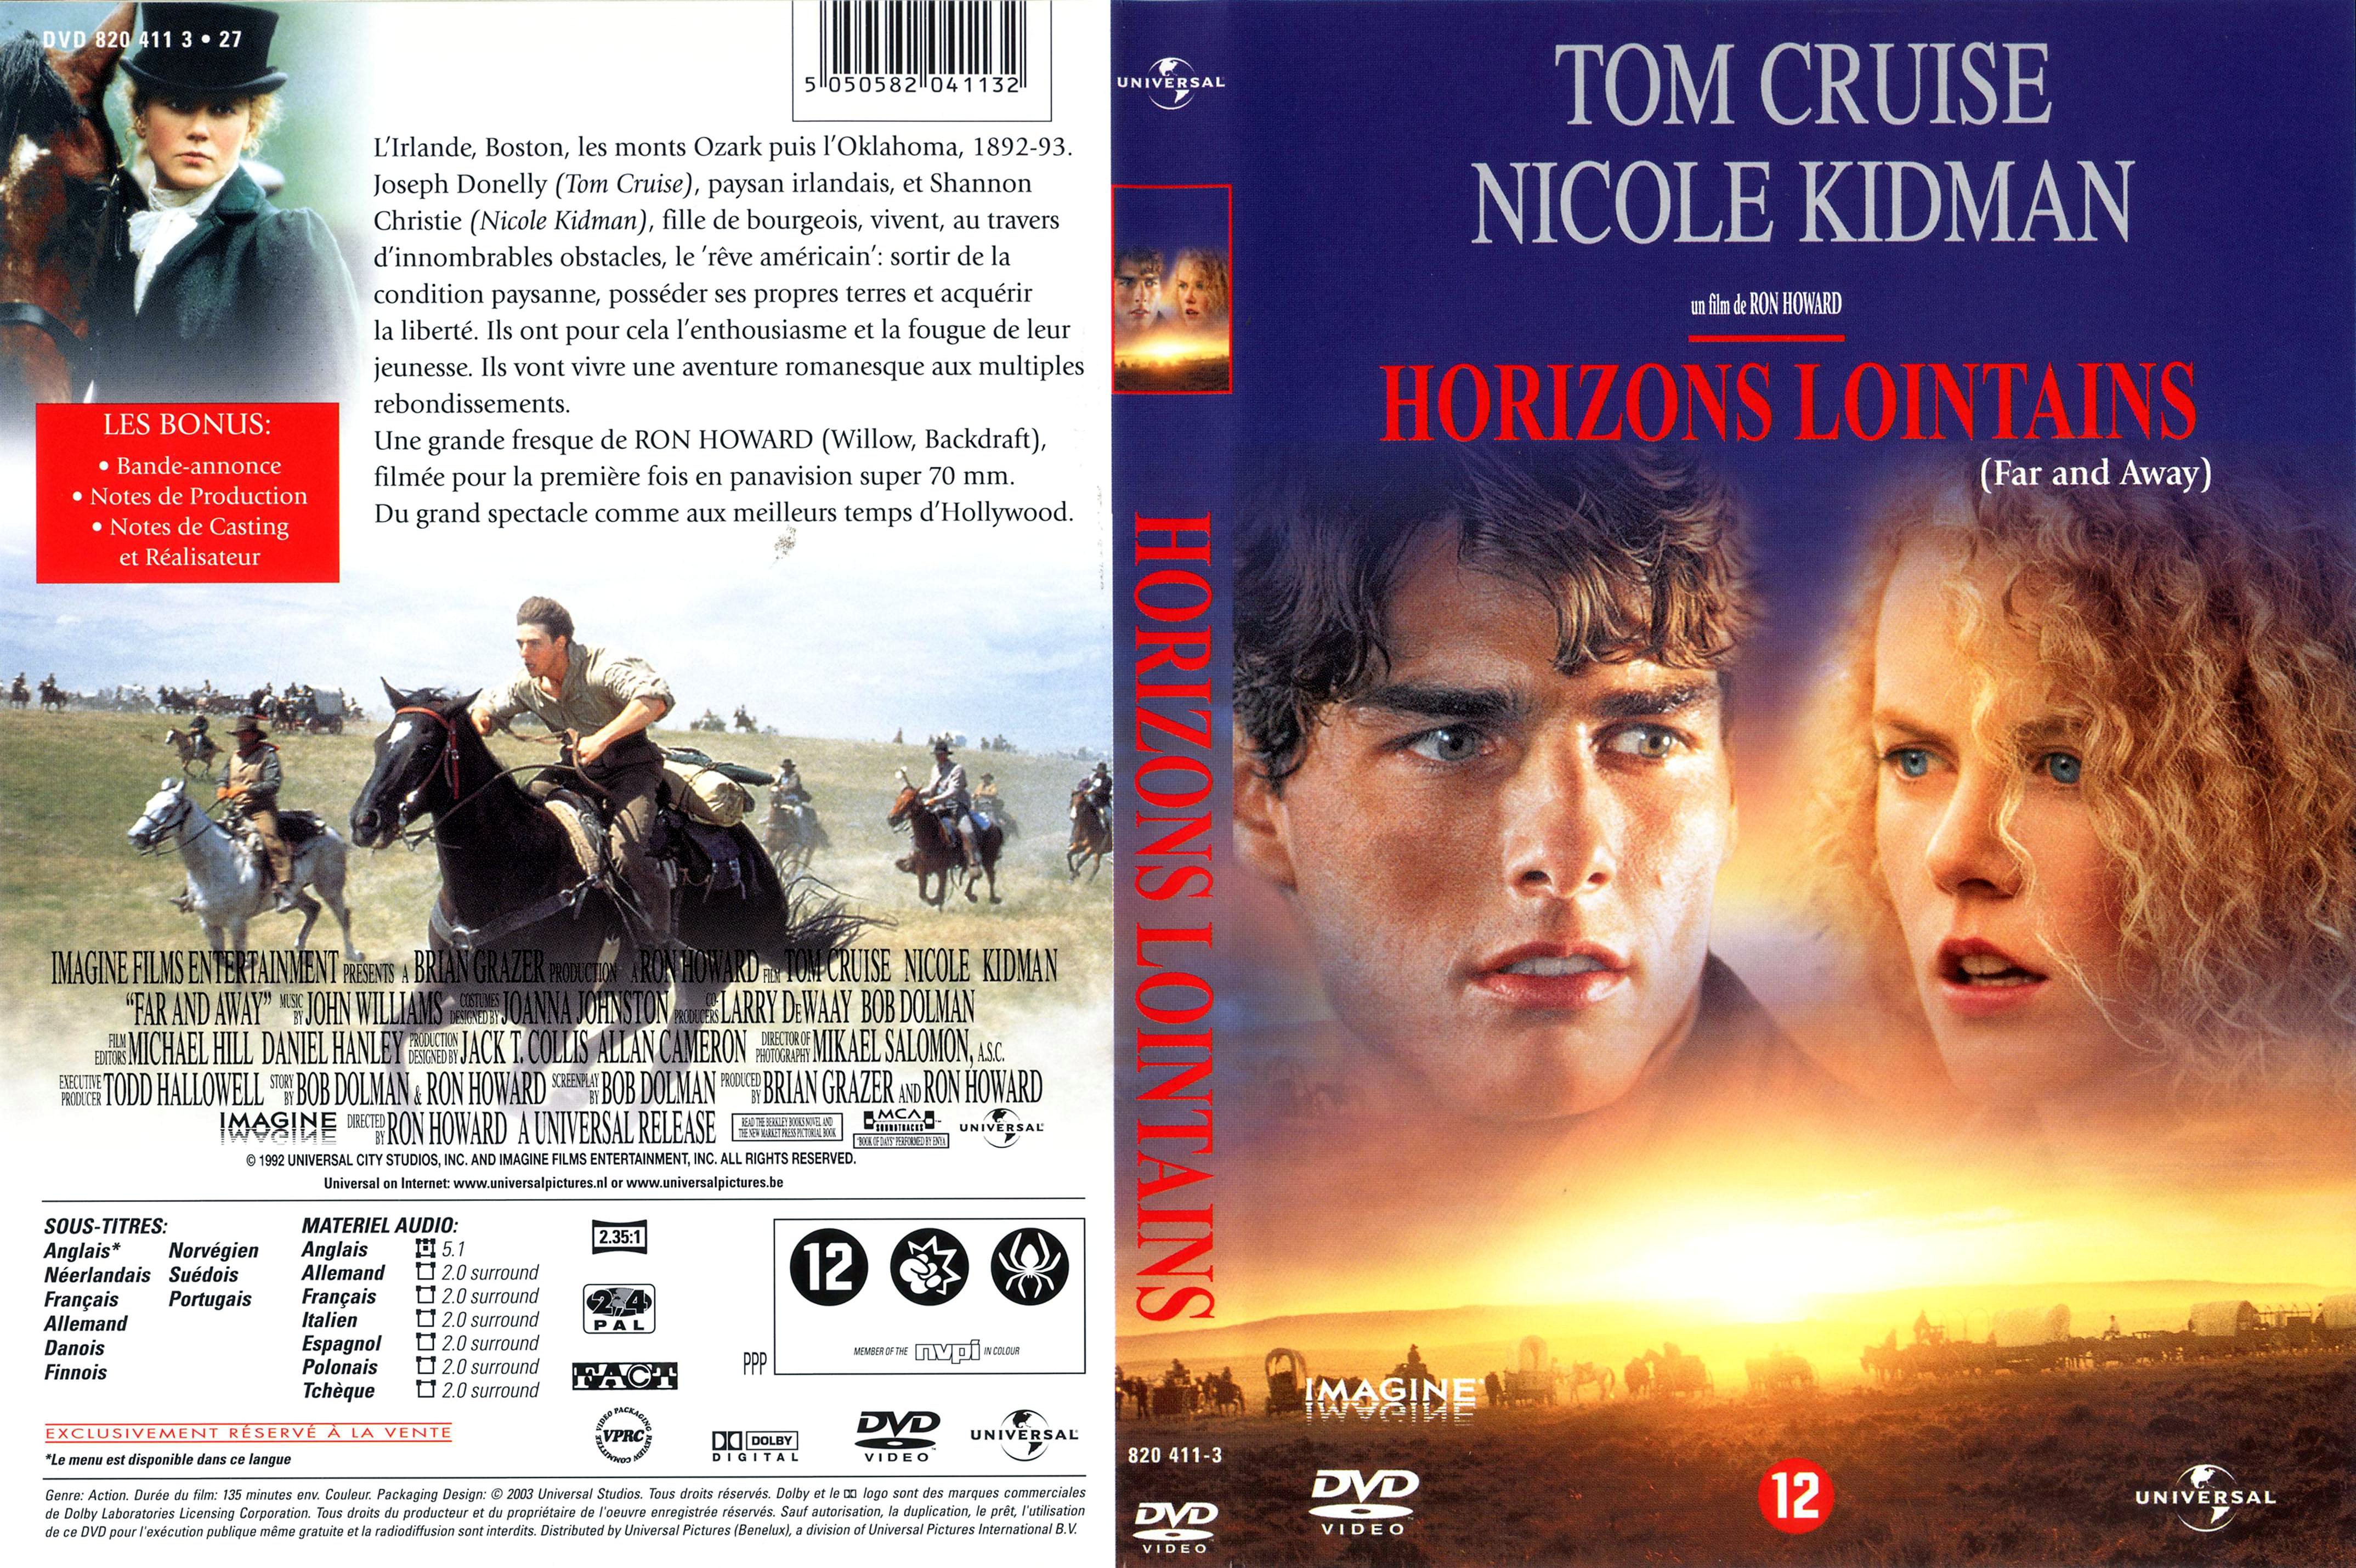 Jaquette DVD Horizons lointains v3